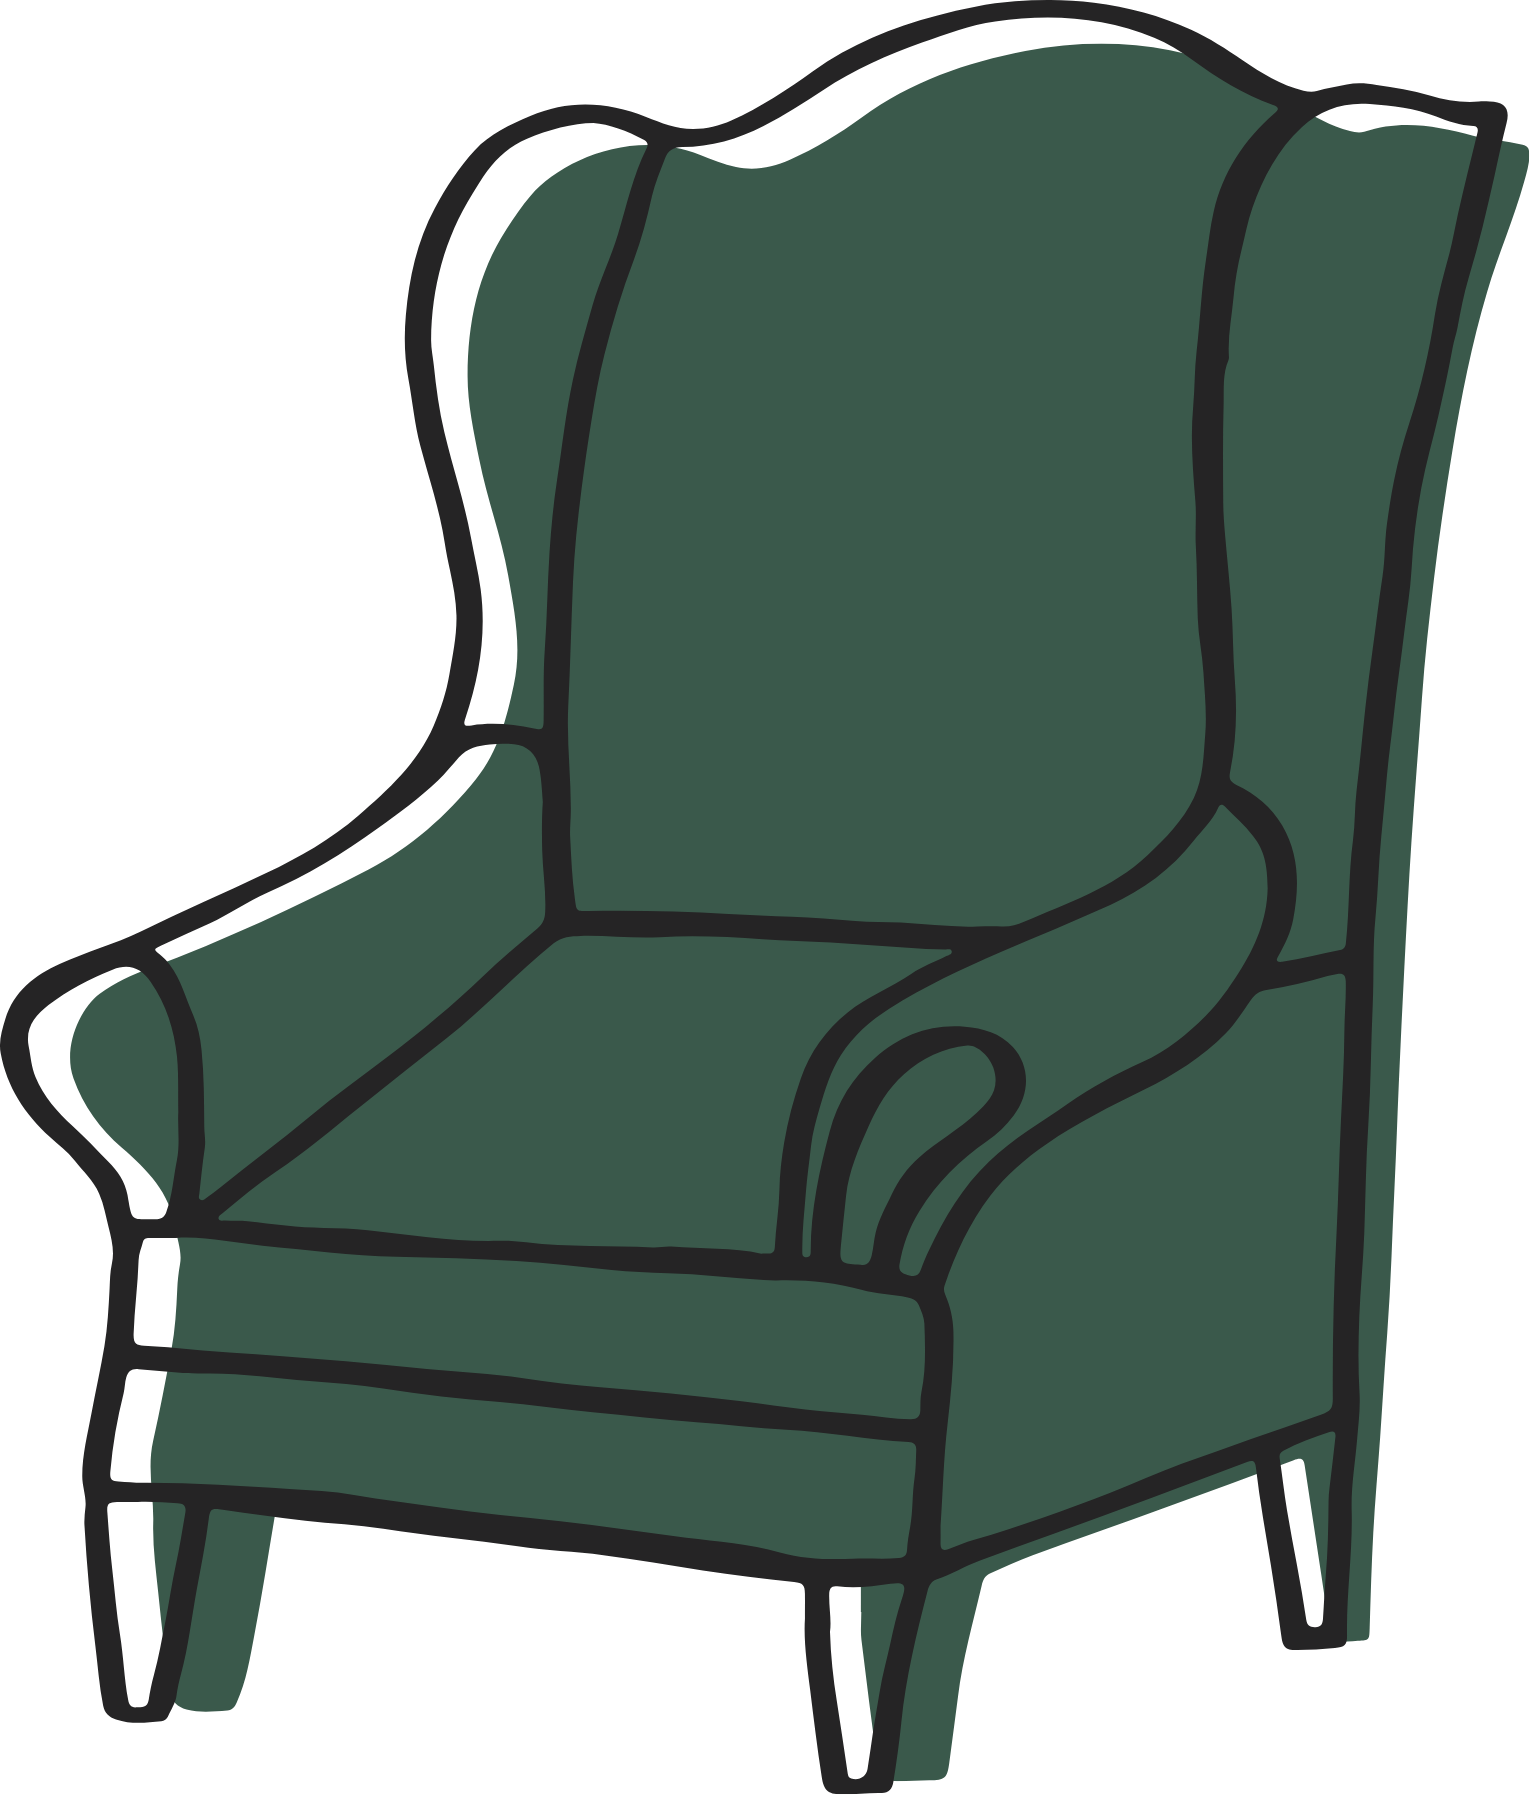 Green Chair Stories copywriter for photographers